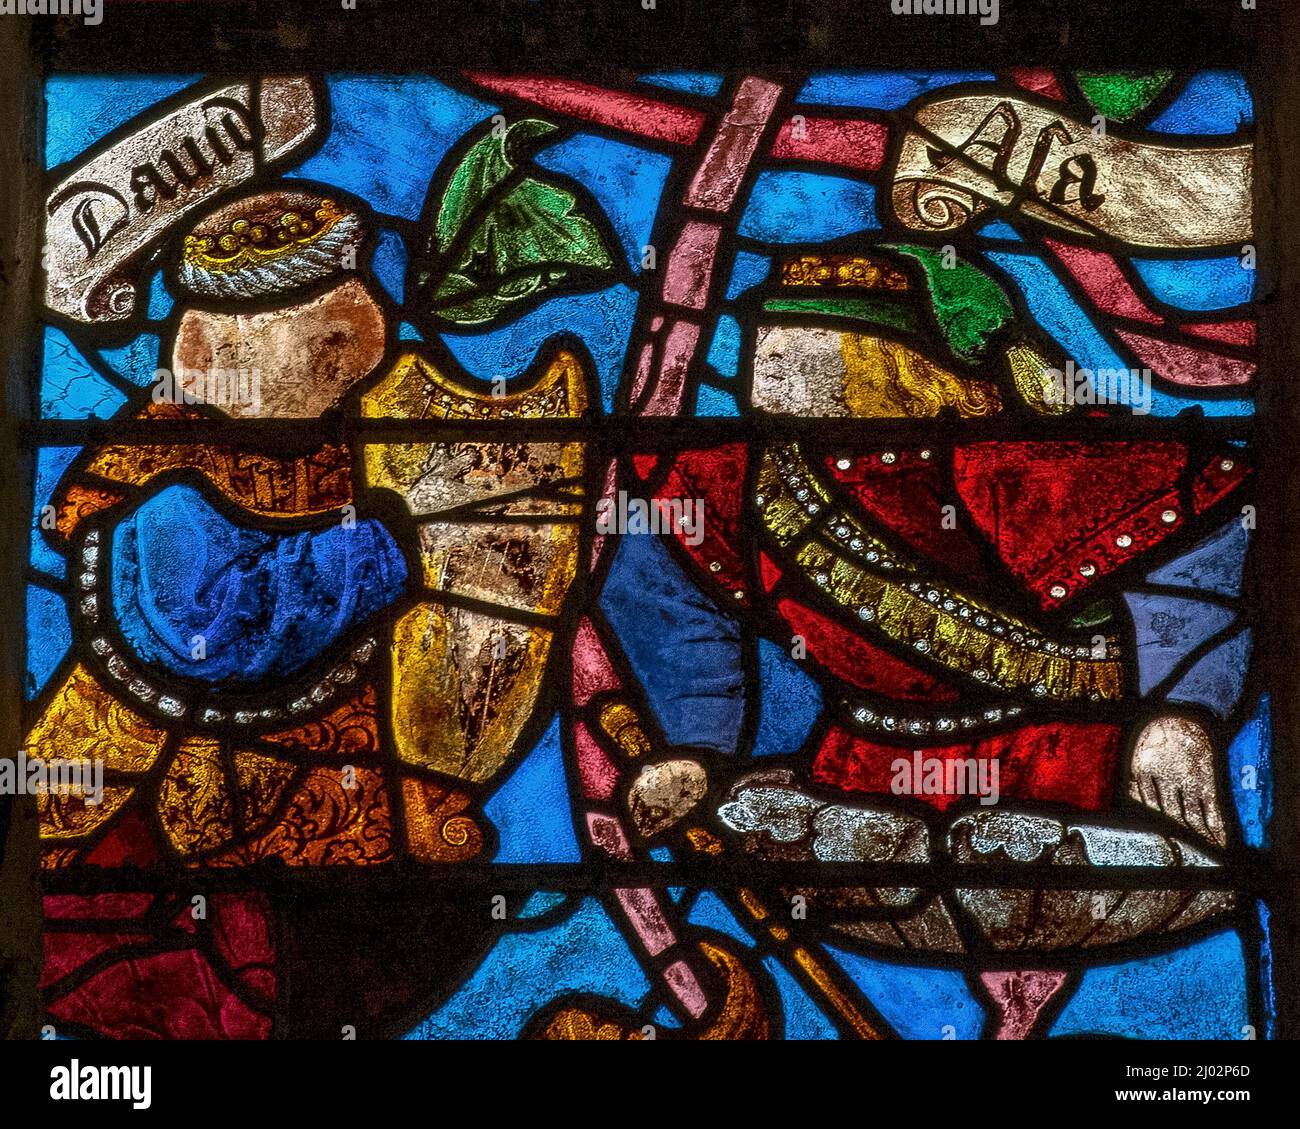 King David of ancient Israel and Judah plays a golden harp in a detail of a colourful stained glass Tree of Jesse, a visual guide to the ancestors of Christ.  Other kings, identified by their crowns and sceptres, are among more than 40 biblical characters supported by daisy-like blossoms sprouting from the tree's branches.  Stained glass of 1512 in the Église Saint-Rémi at Ceffonds, a village in the Champagne region. Stock Photo